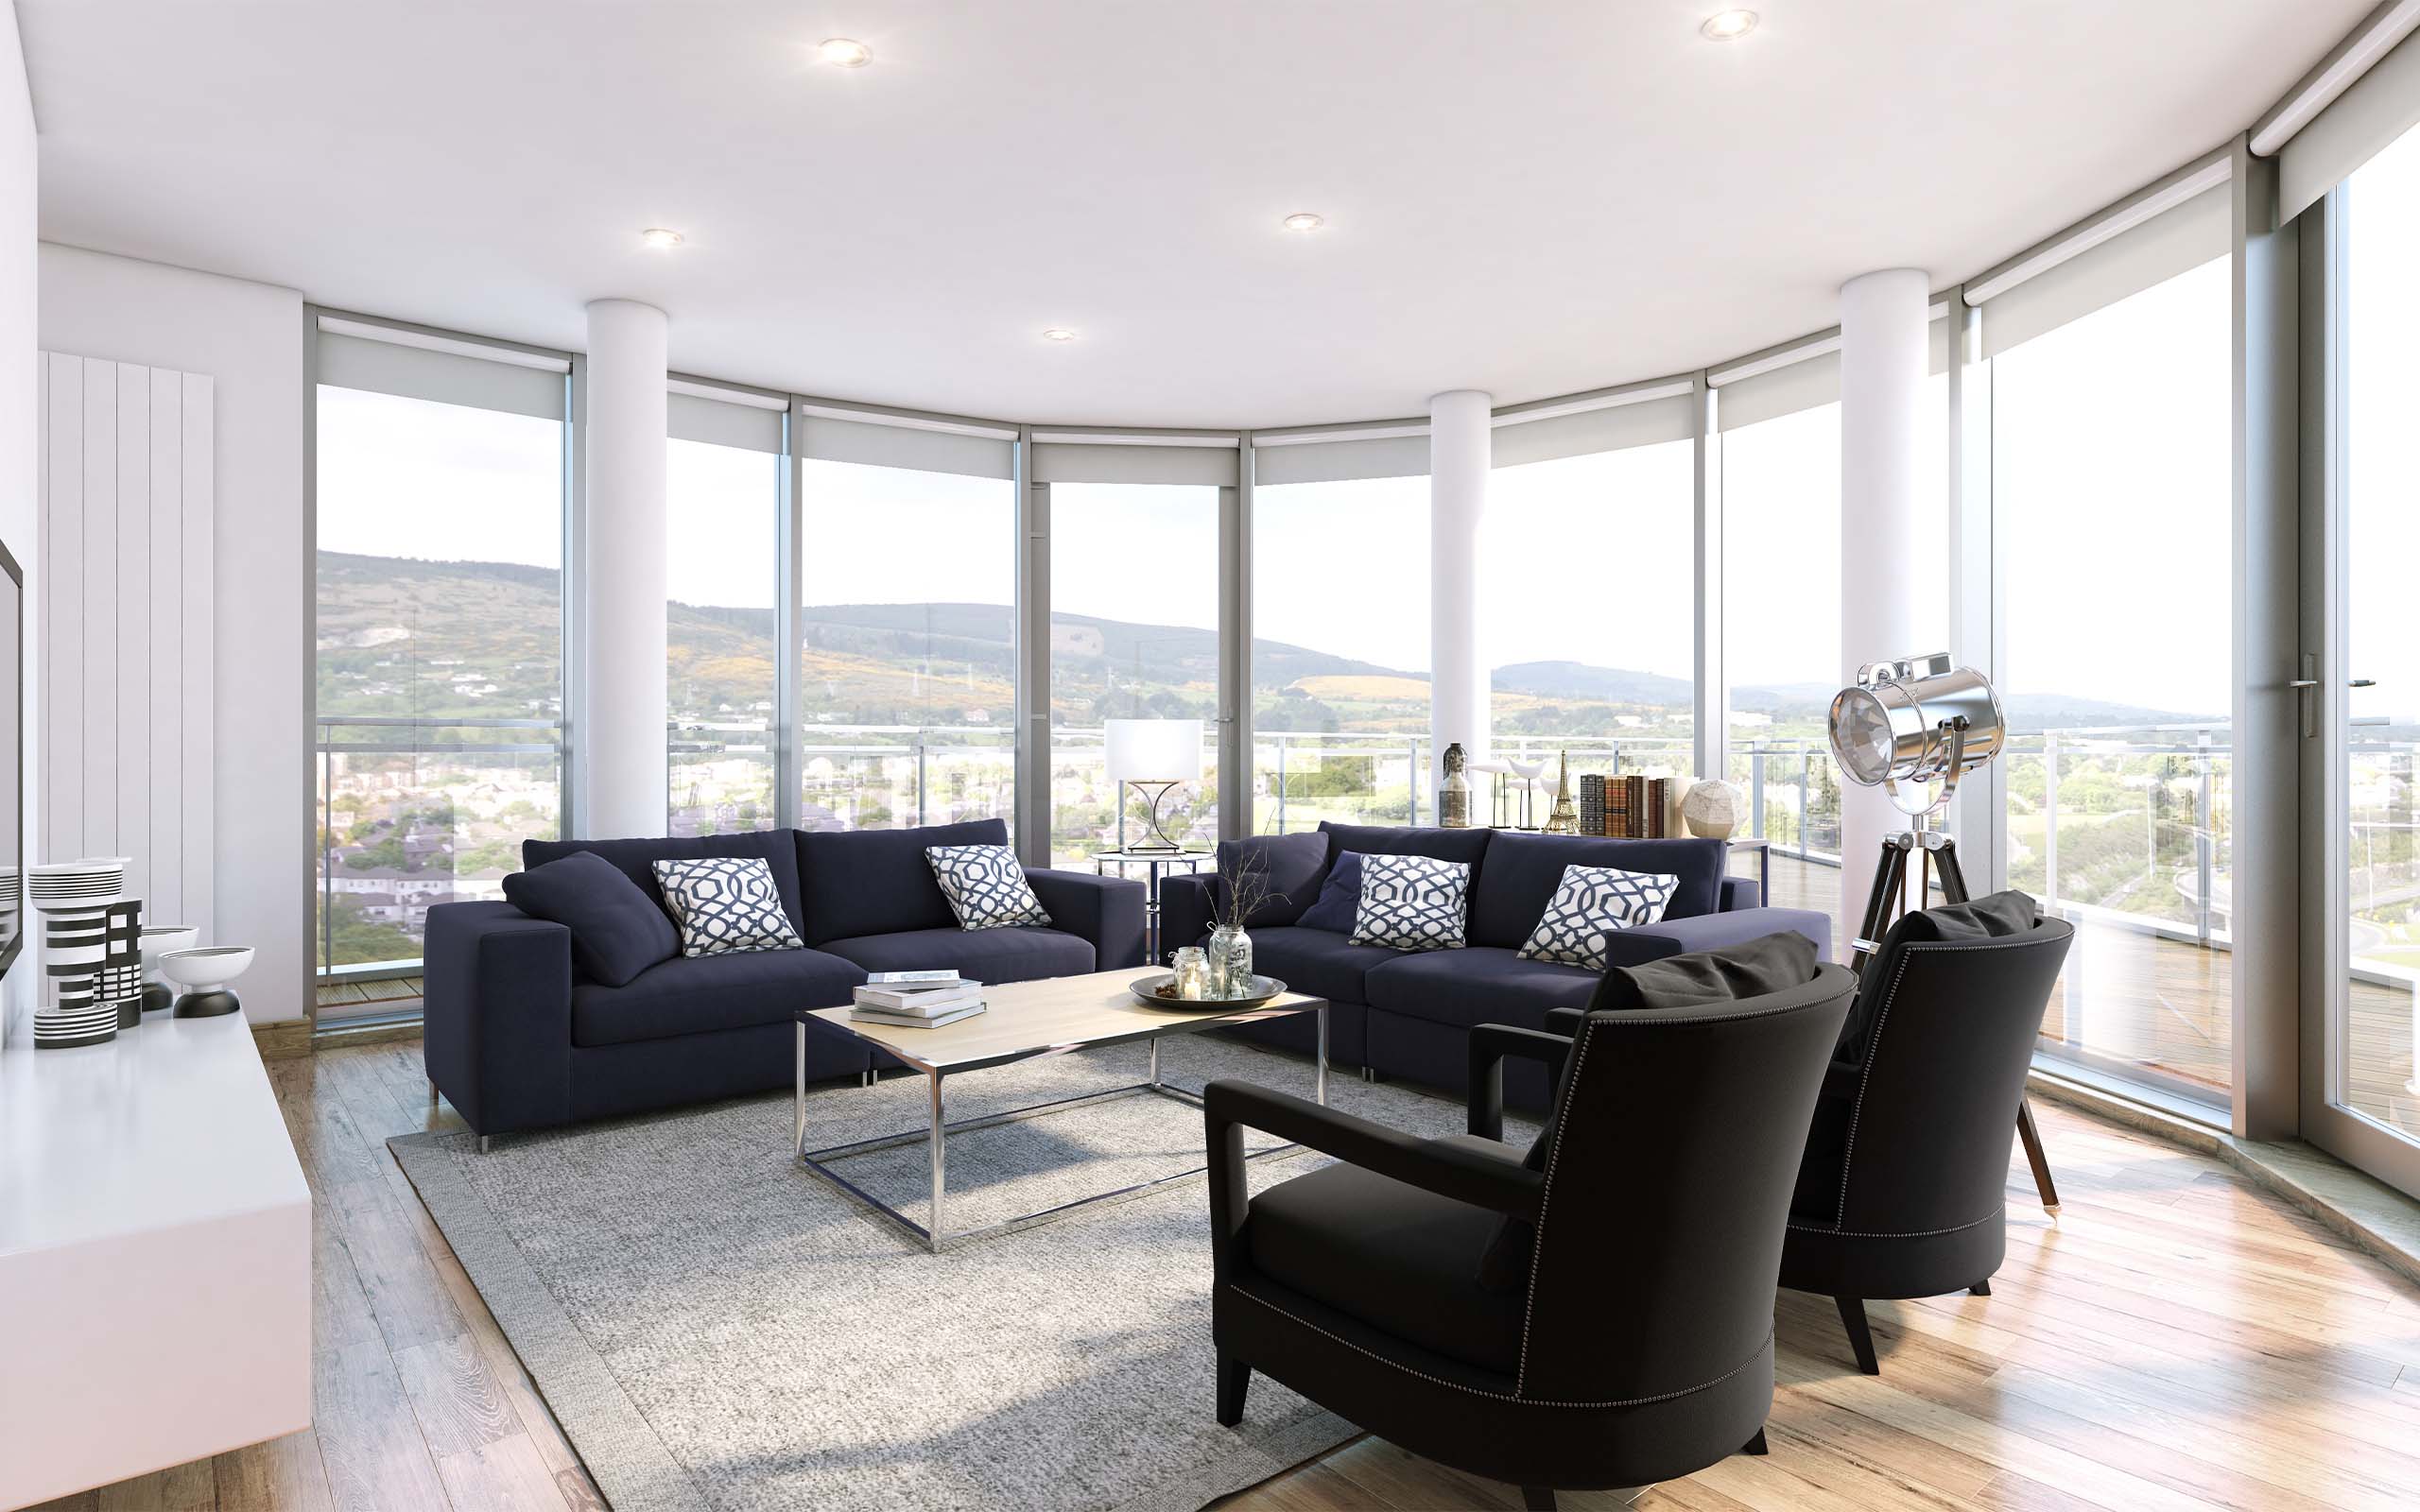 Virtual Staging of a luxury apartment development.